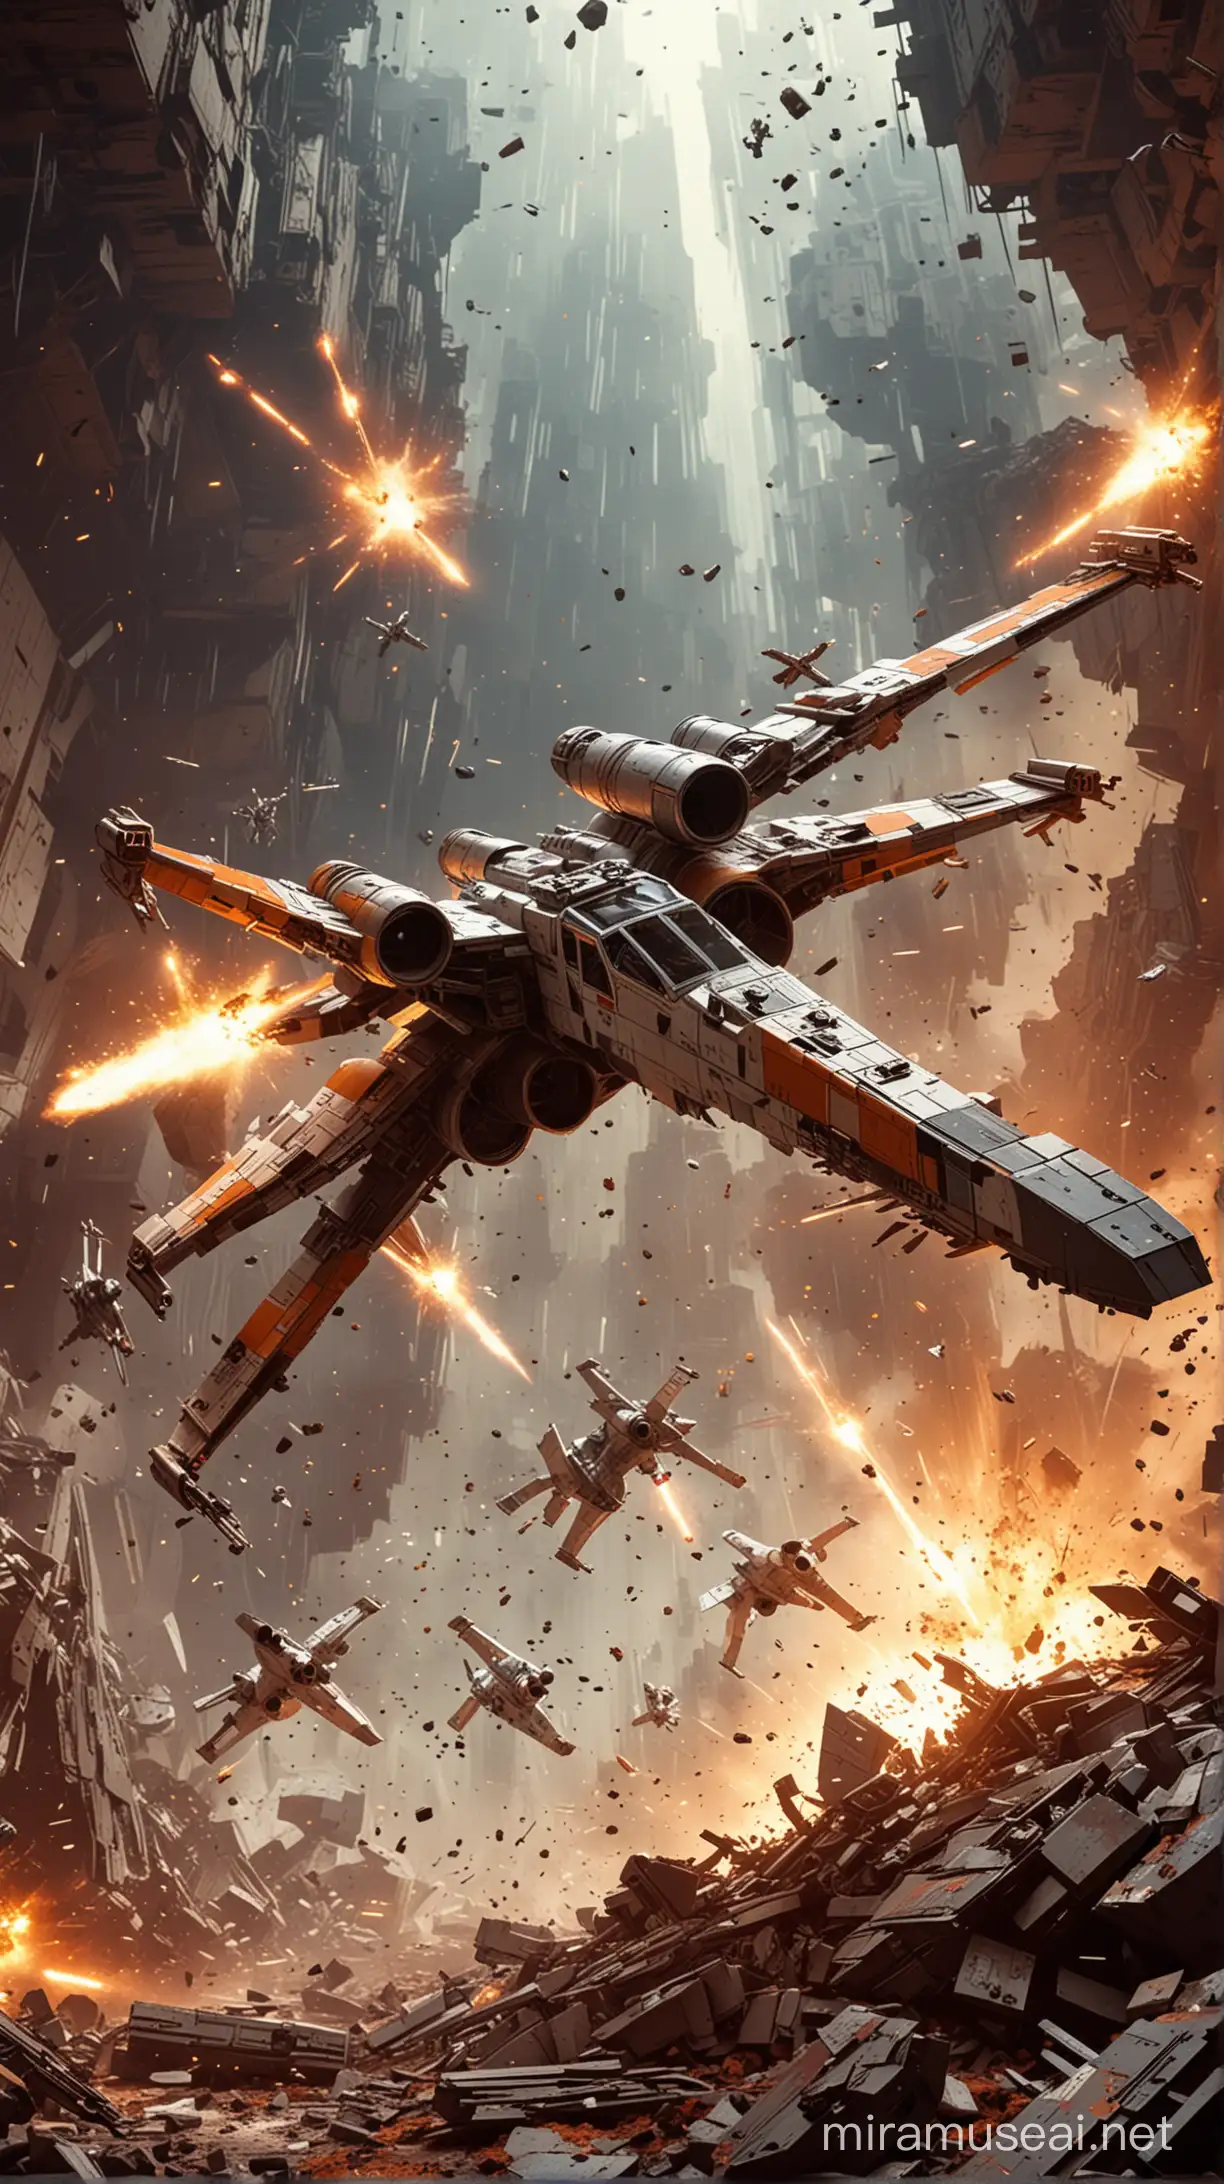 Epic Star Wars XWing Dogfight Amidst Glowing Explosions in Pixel Art Chrome Style